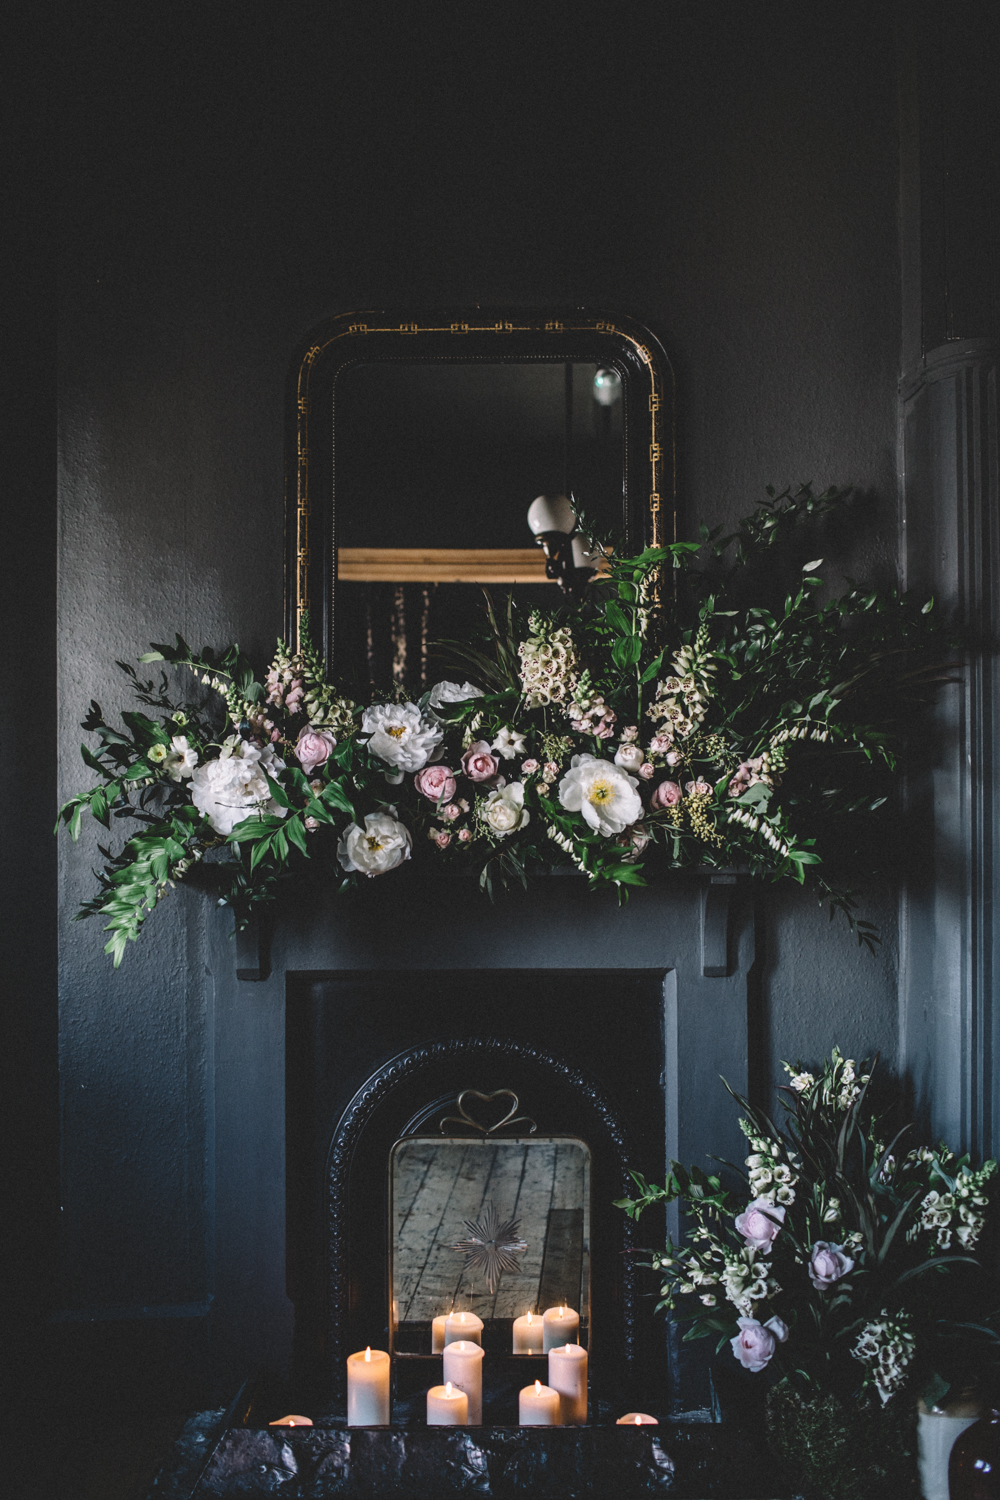 The fireplace was decorated with white and blush blooms and lush greenery